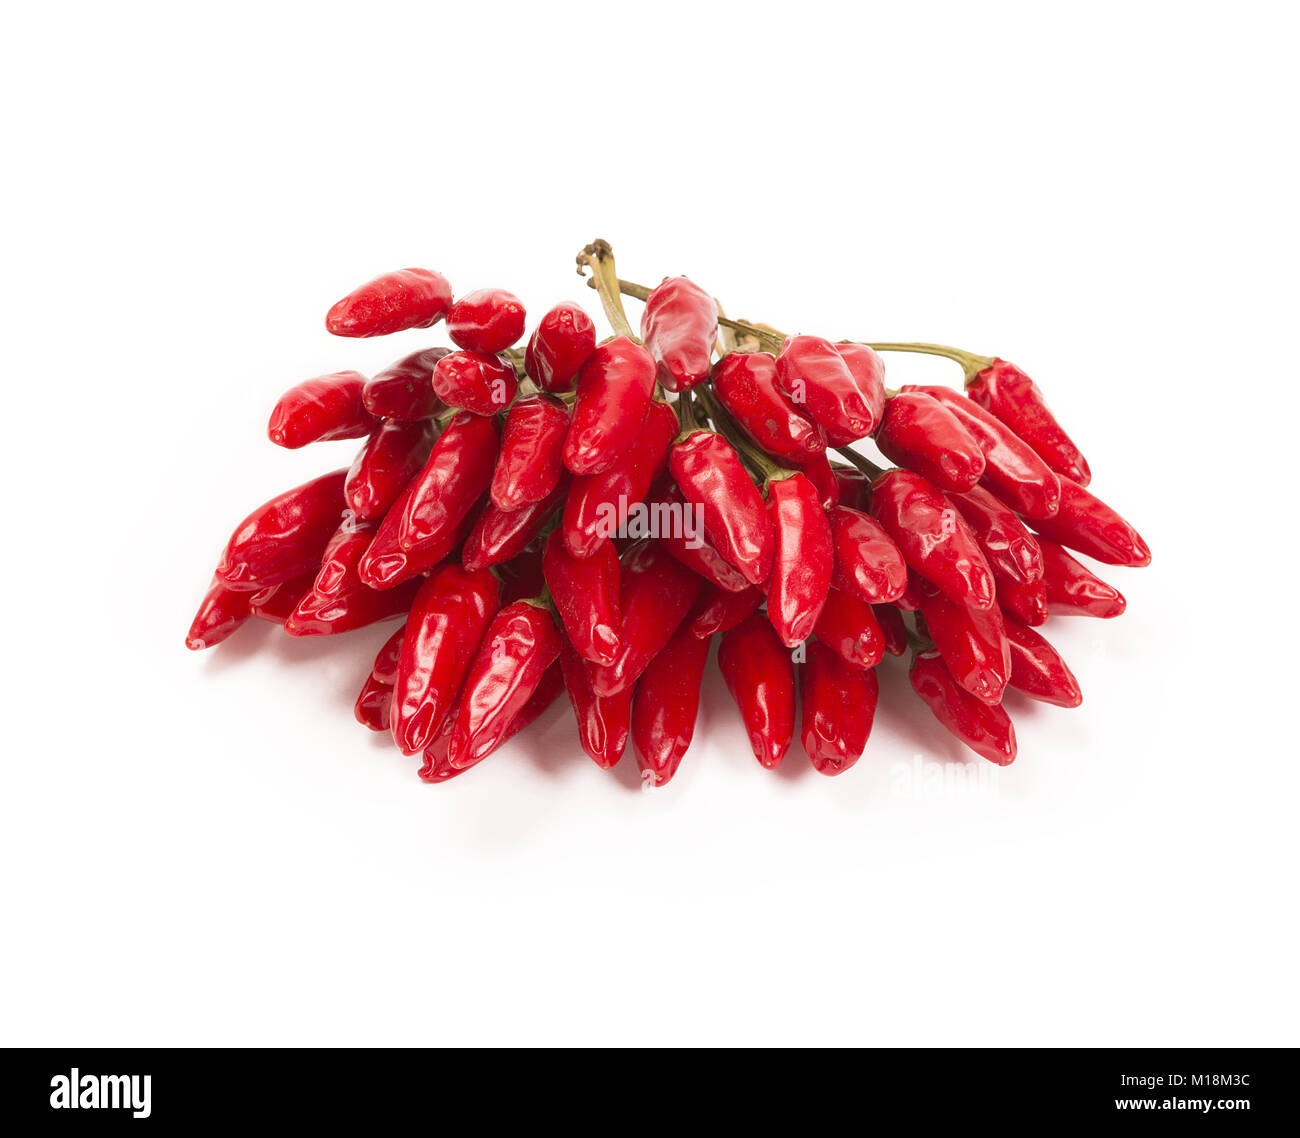 red hot chili pepper isolated on a white background Stock Photo